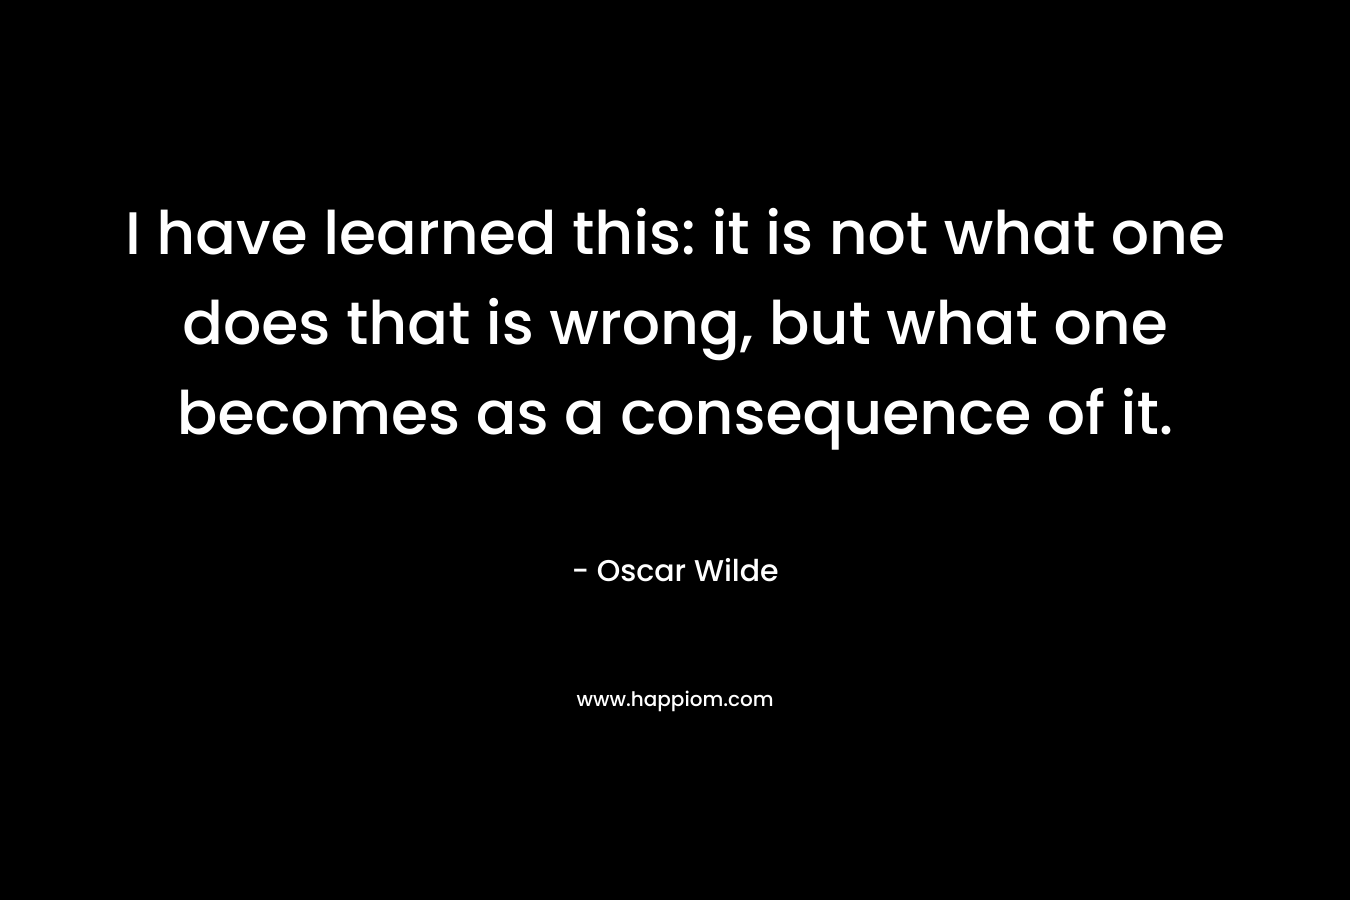 I have learned this: it is not what one does that is wrong, but what one becomes as a consequence of it.